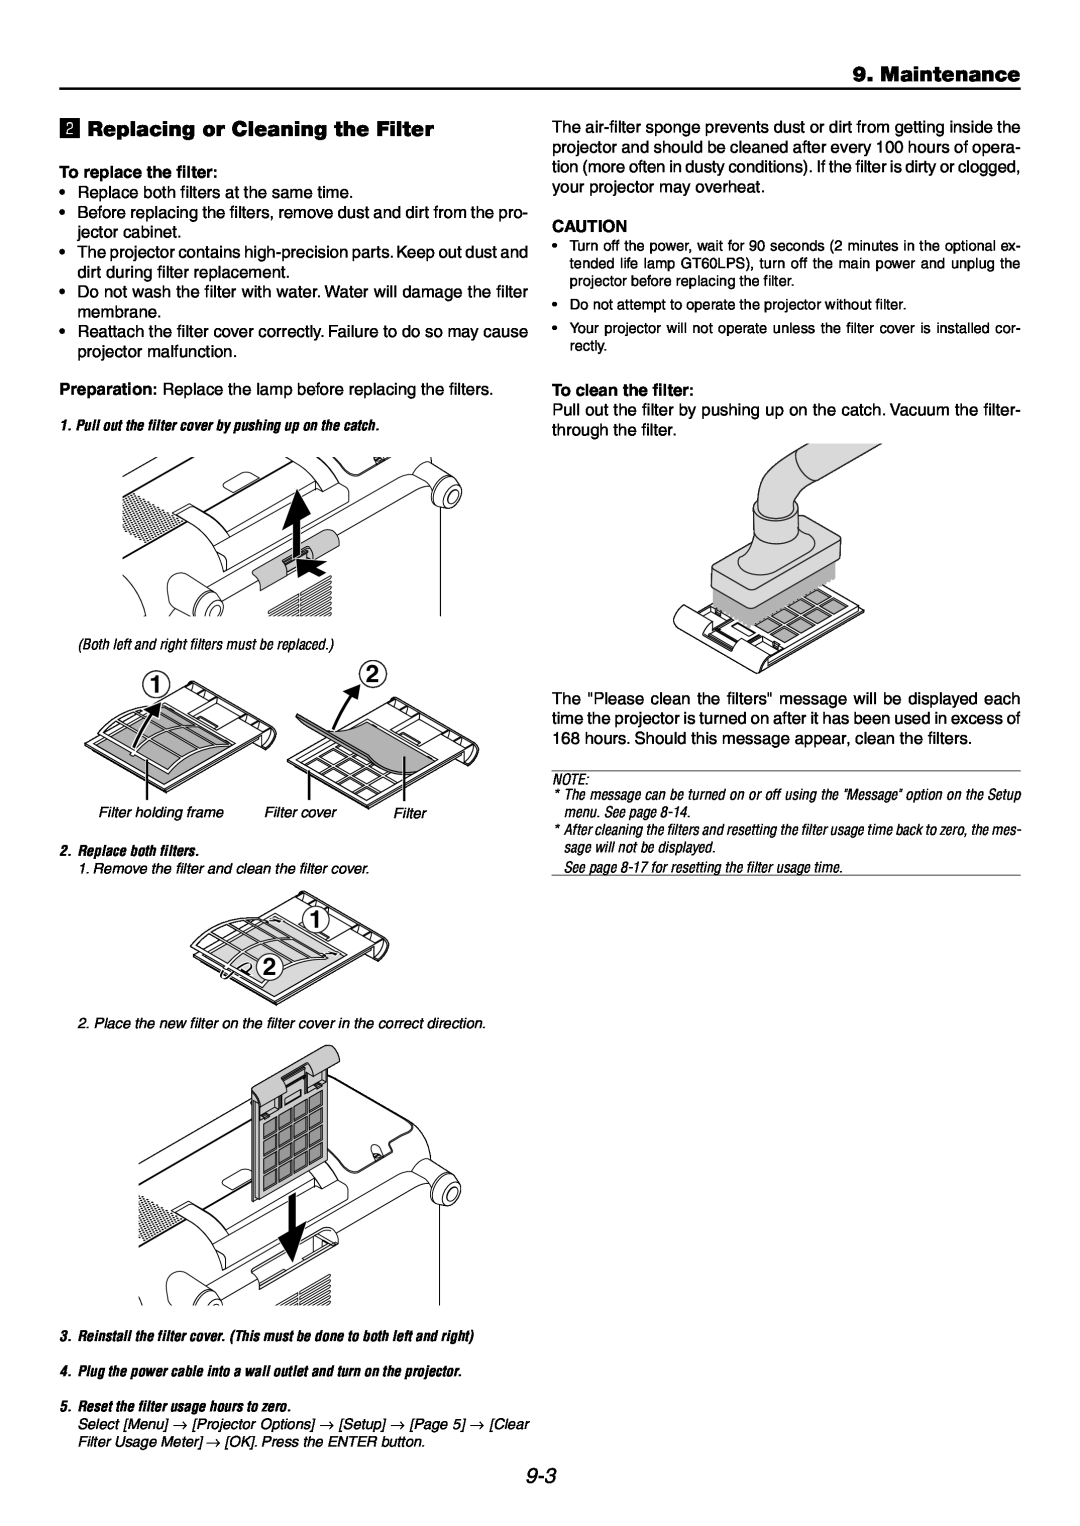 NEC GT6000 user manual Maintenance, x Replacing or Cleaning the Filter, To replace the filter, To clean the filter 